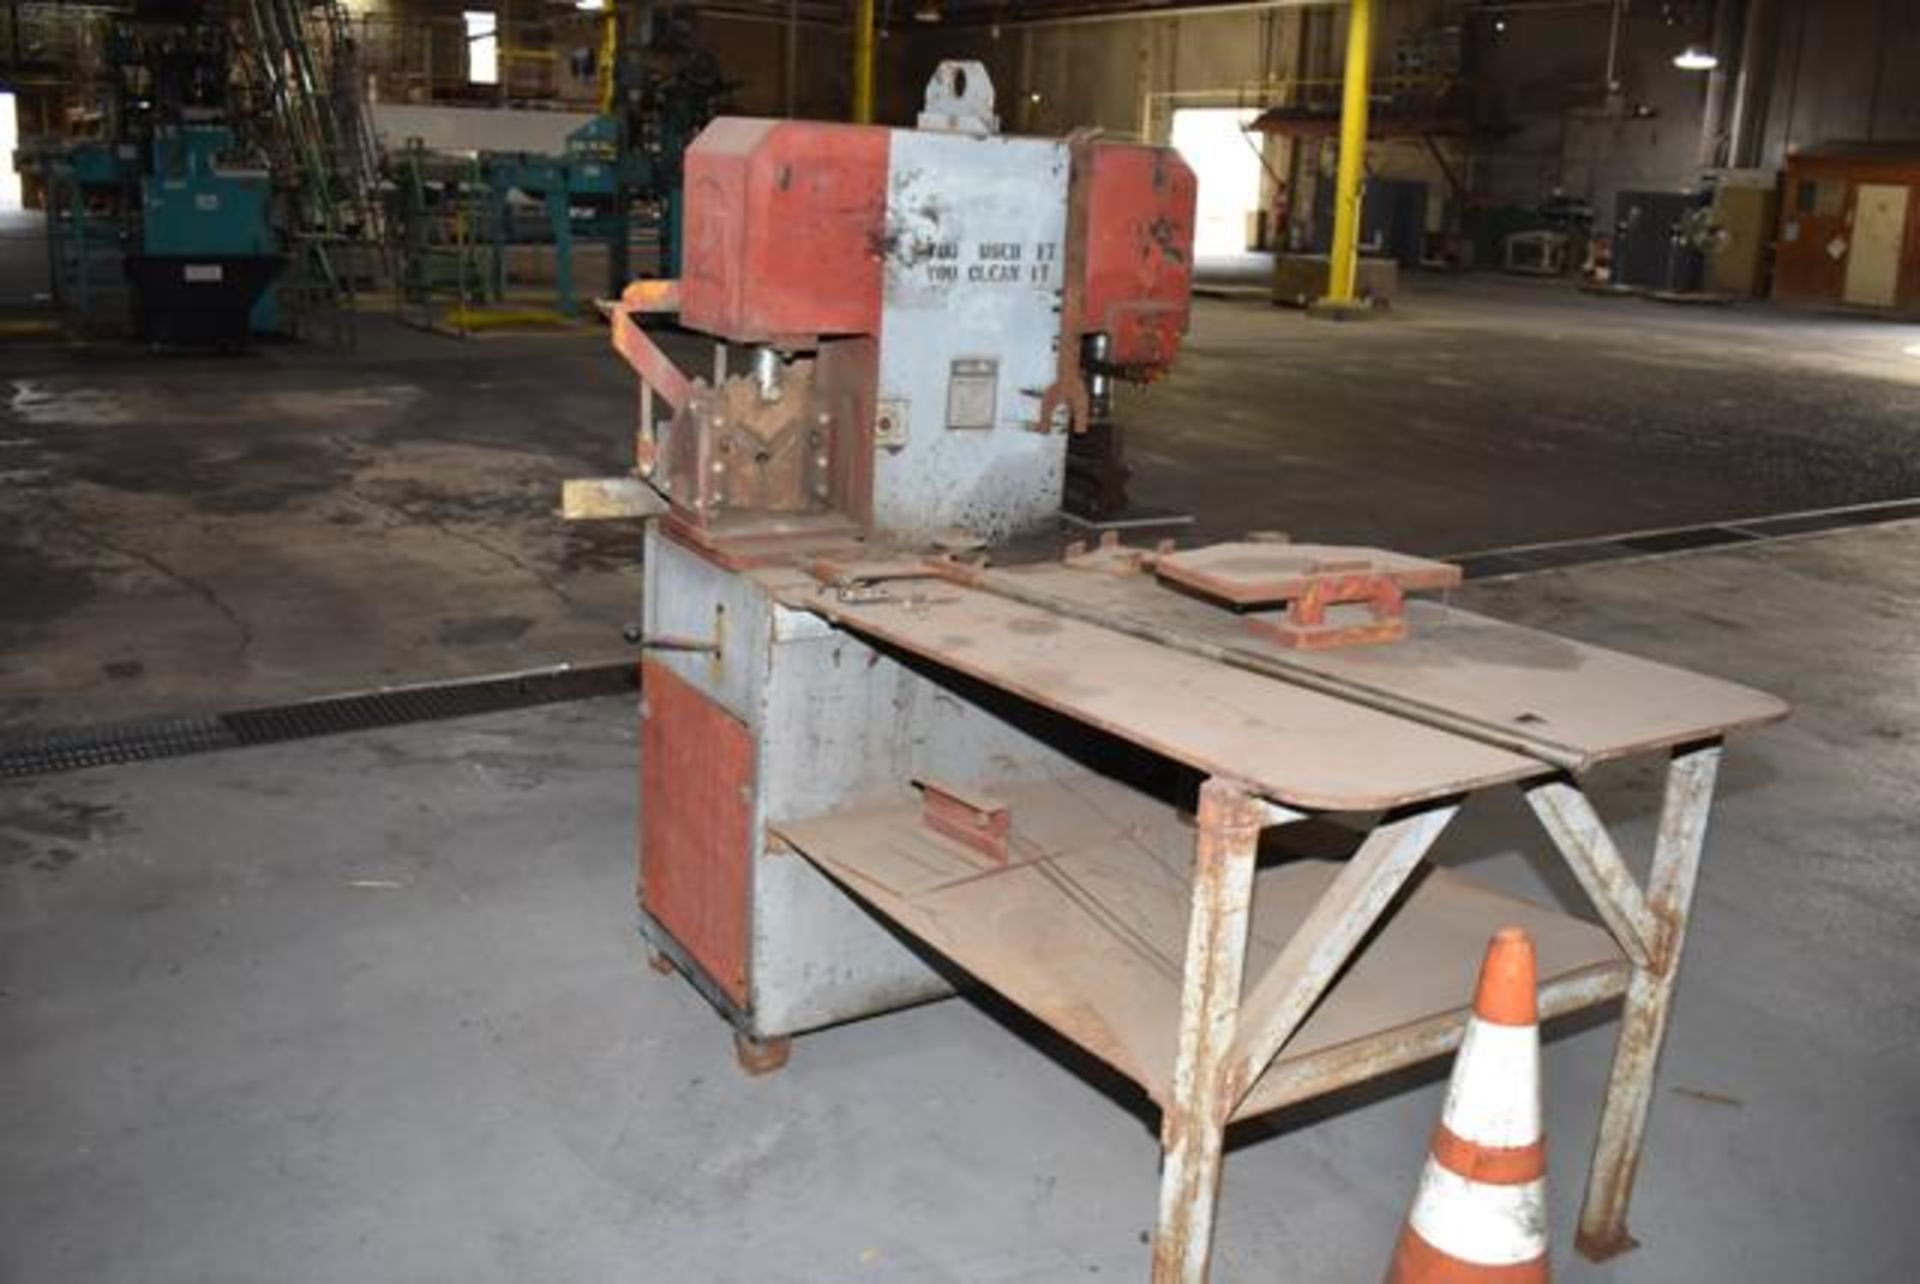 Springwater Model 30/30 Ironworker, Rated 30 Ton Punch, Press Brake Tooling, Steel Table - Image 2 of 3